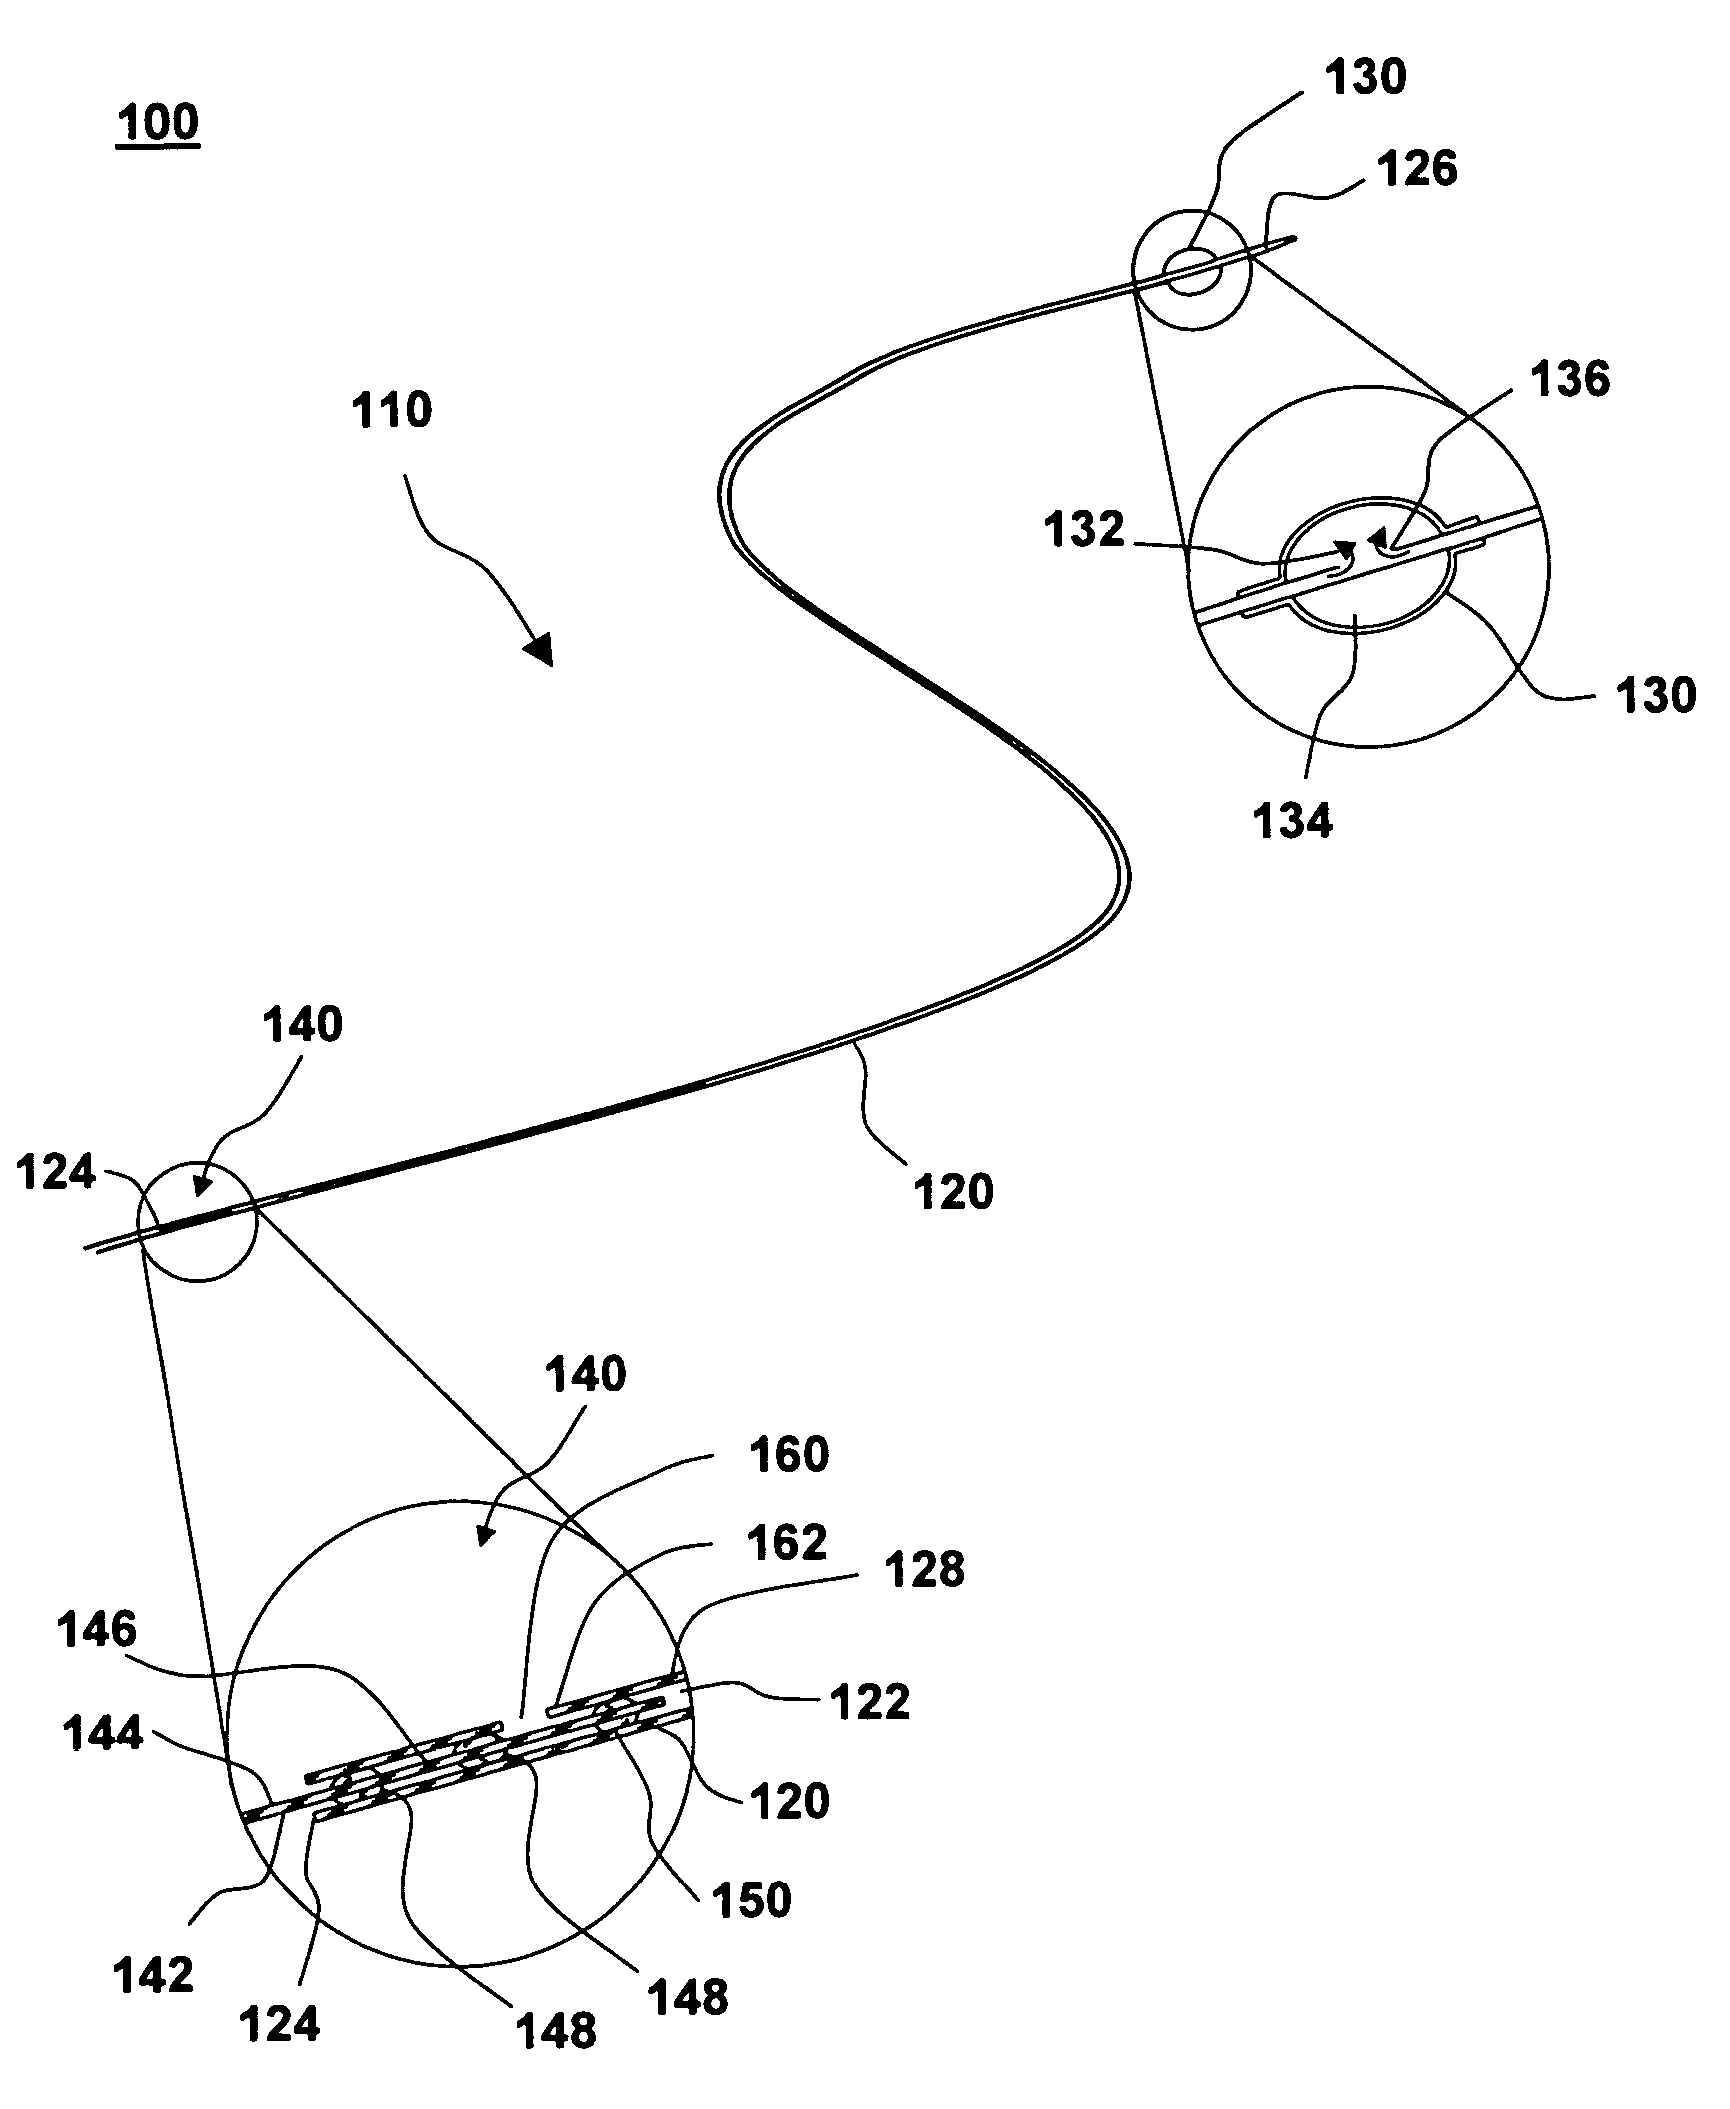 Occlusion catheter with frictional valve